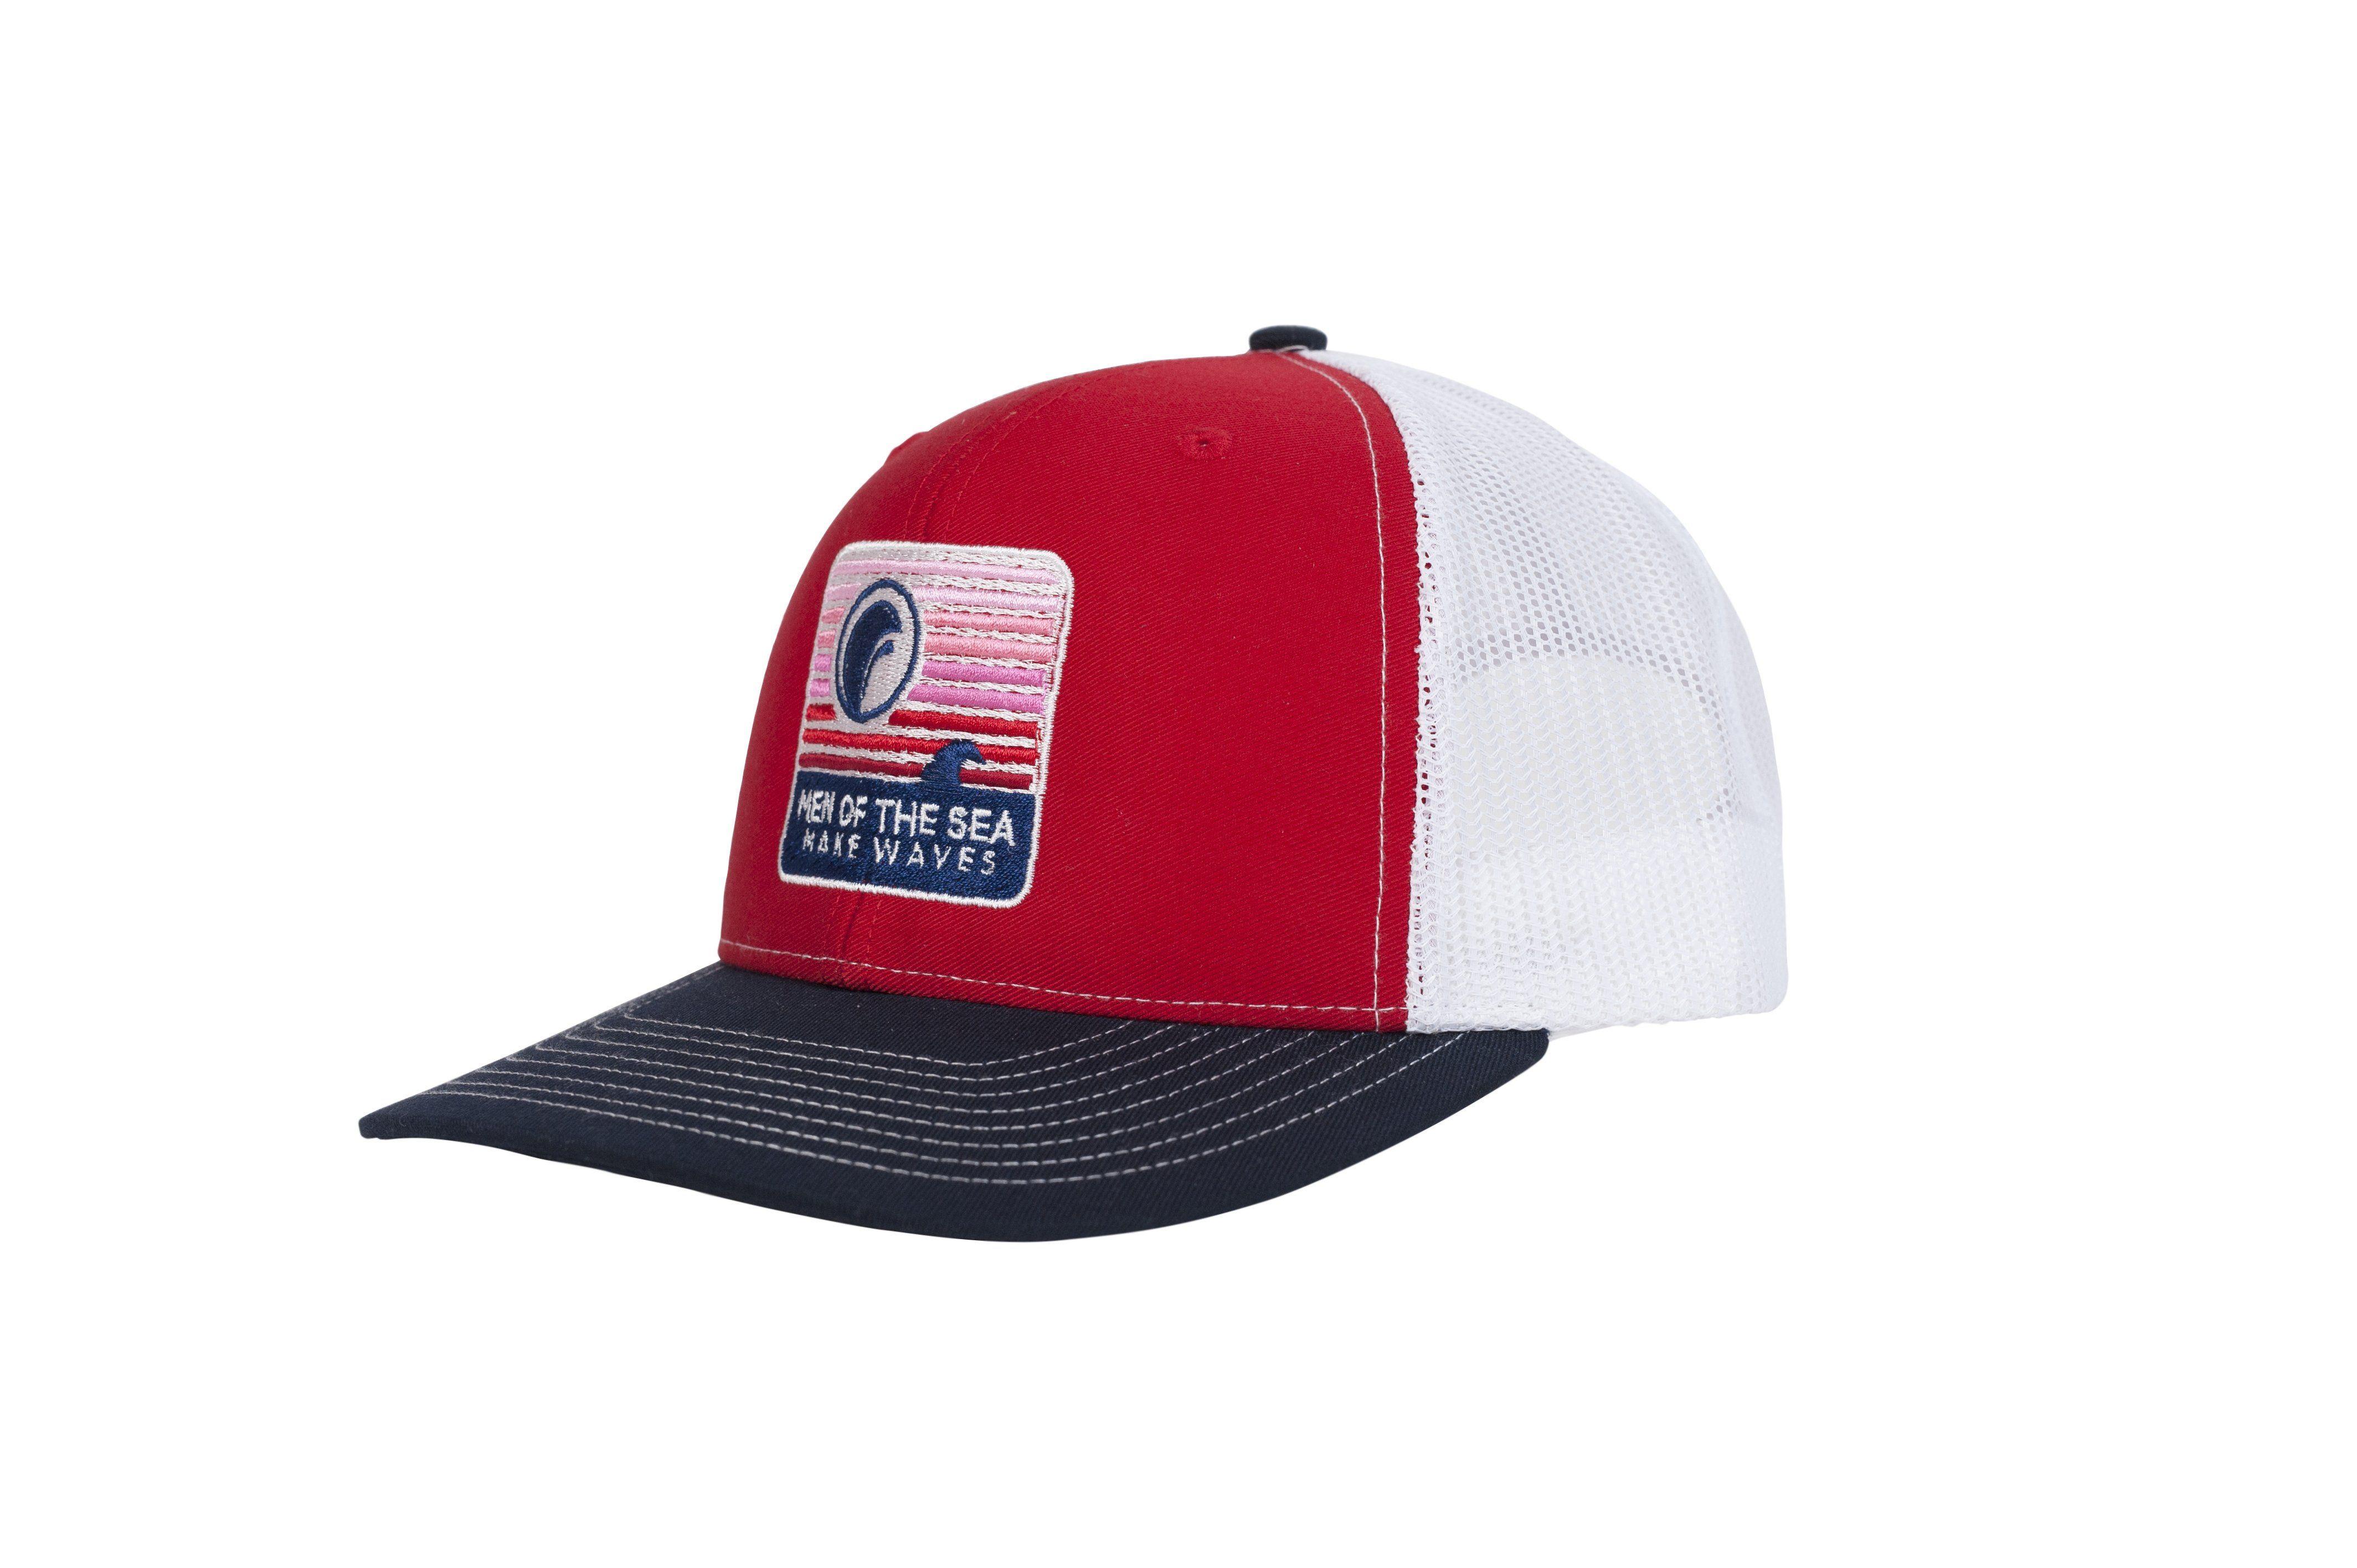 Red and White Waves Logo - Sunset Trucker Hat (Red, White & Blue) | MEN OF THE SEA - MAKE WAVES